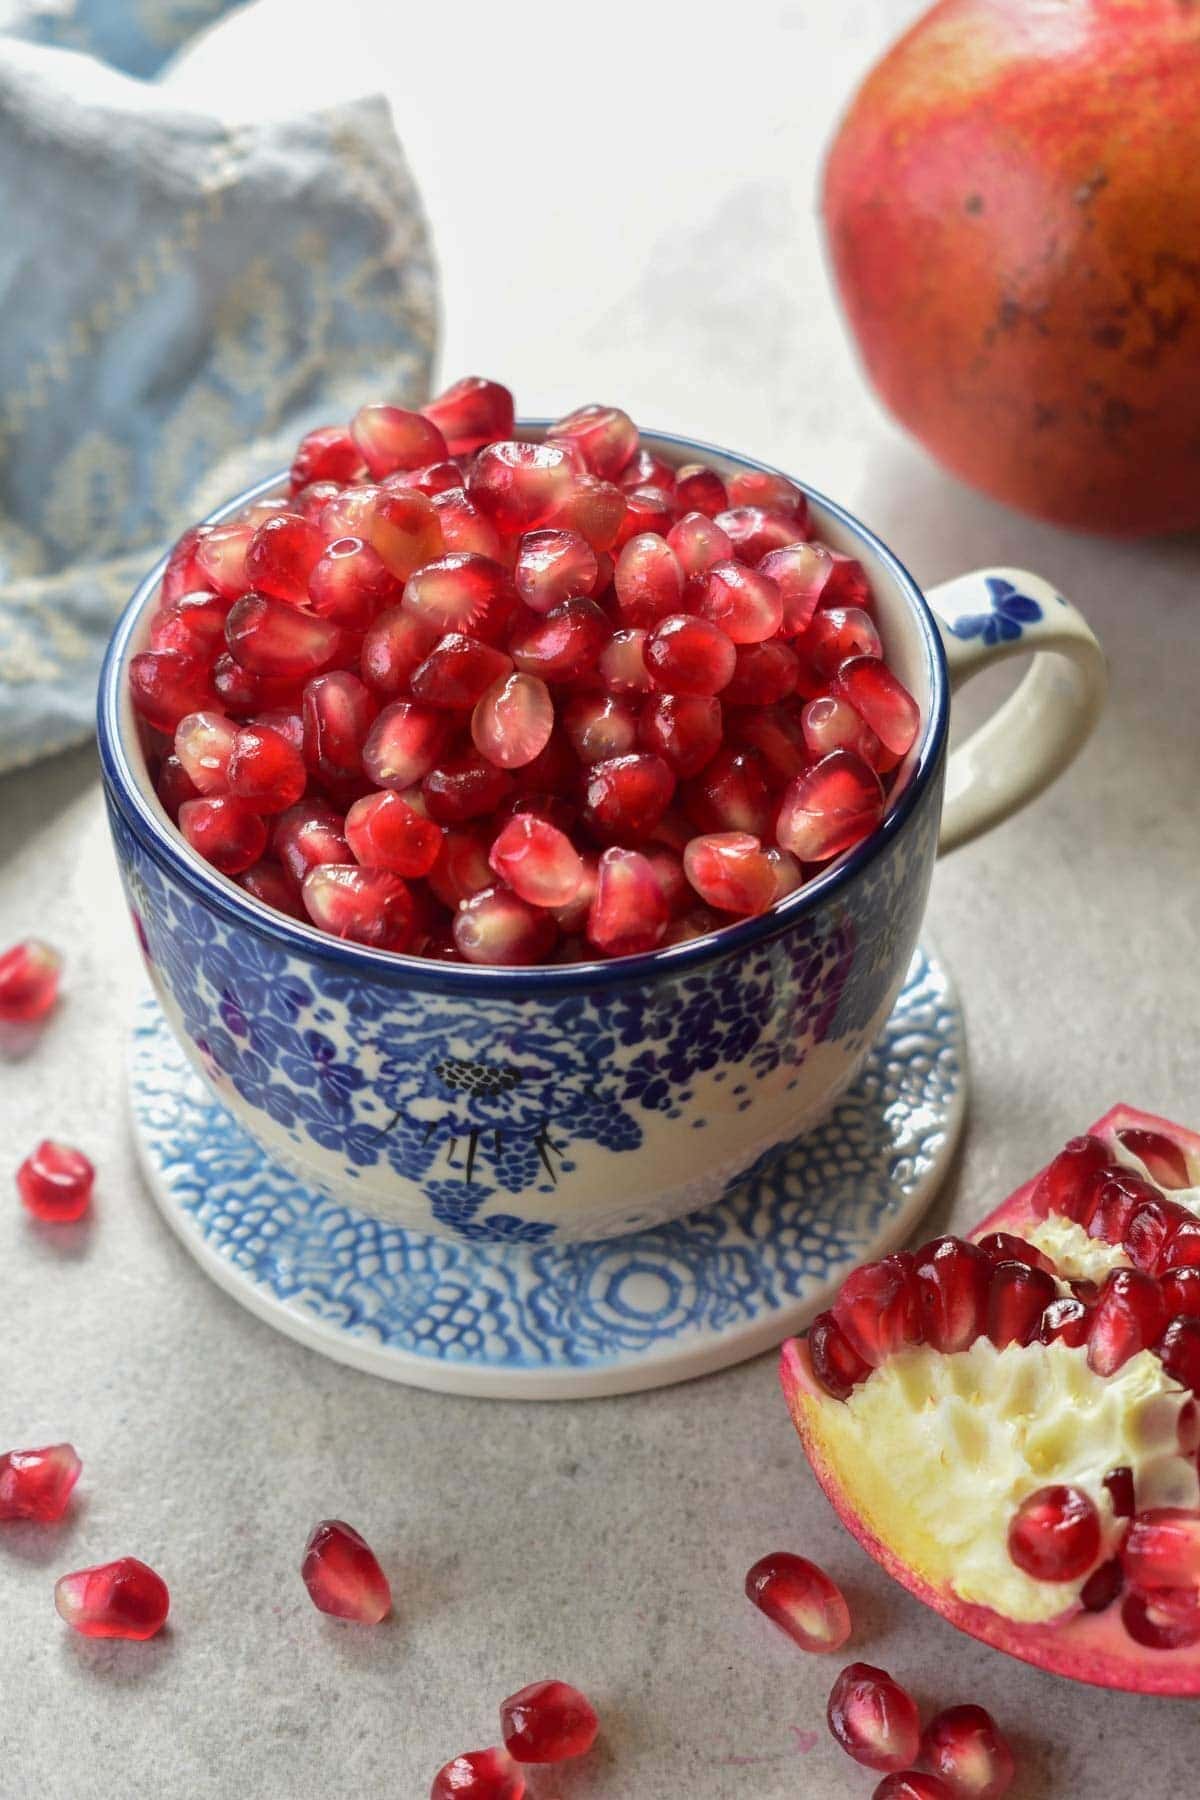 Pomegranate seeds in a blue cup. Pomegranate in the background.